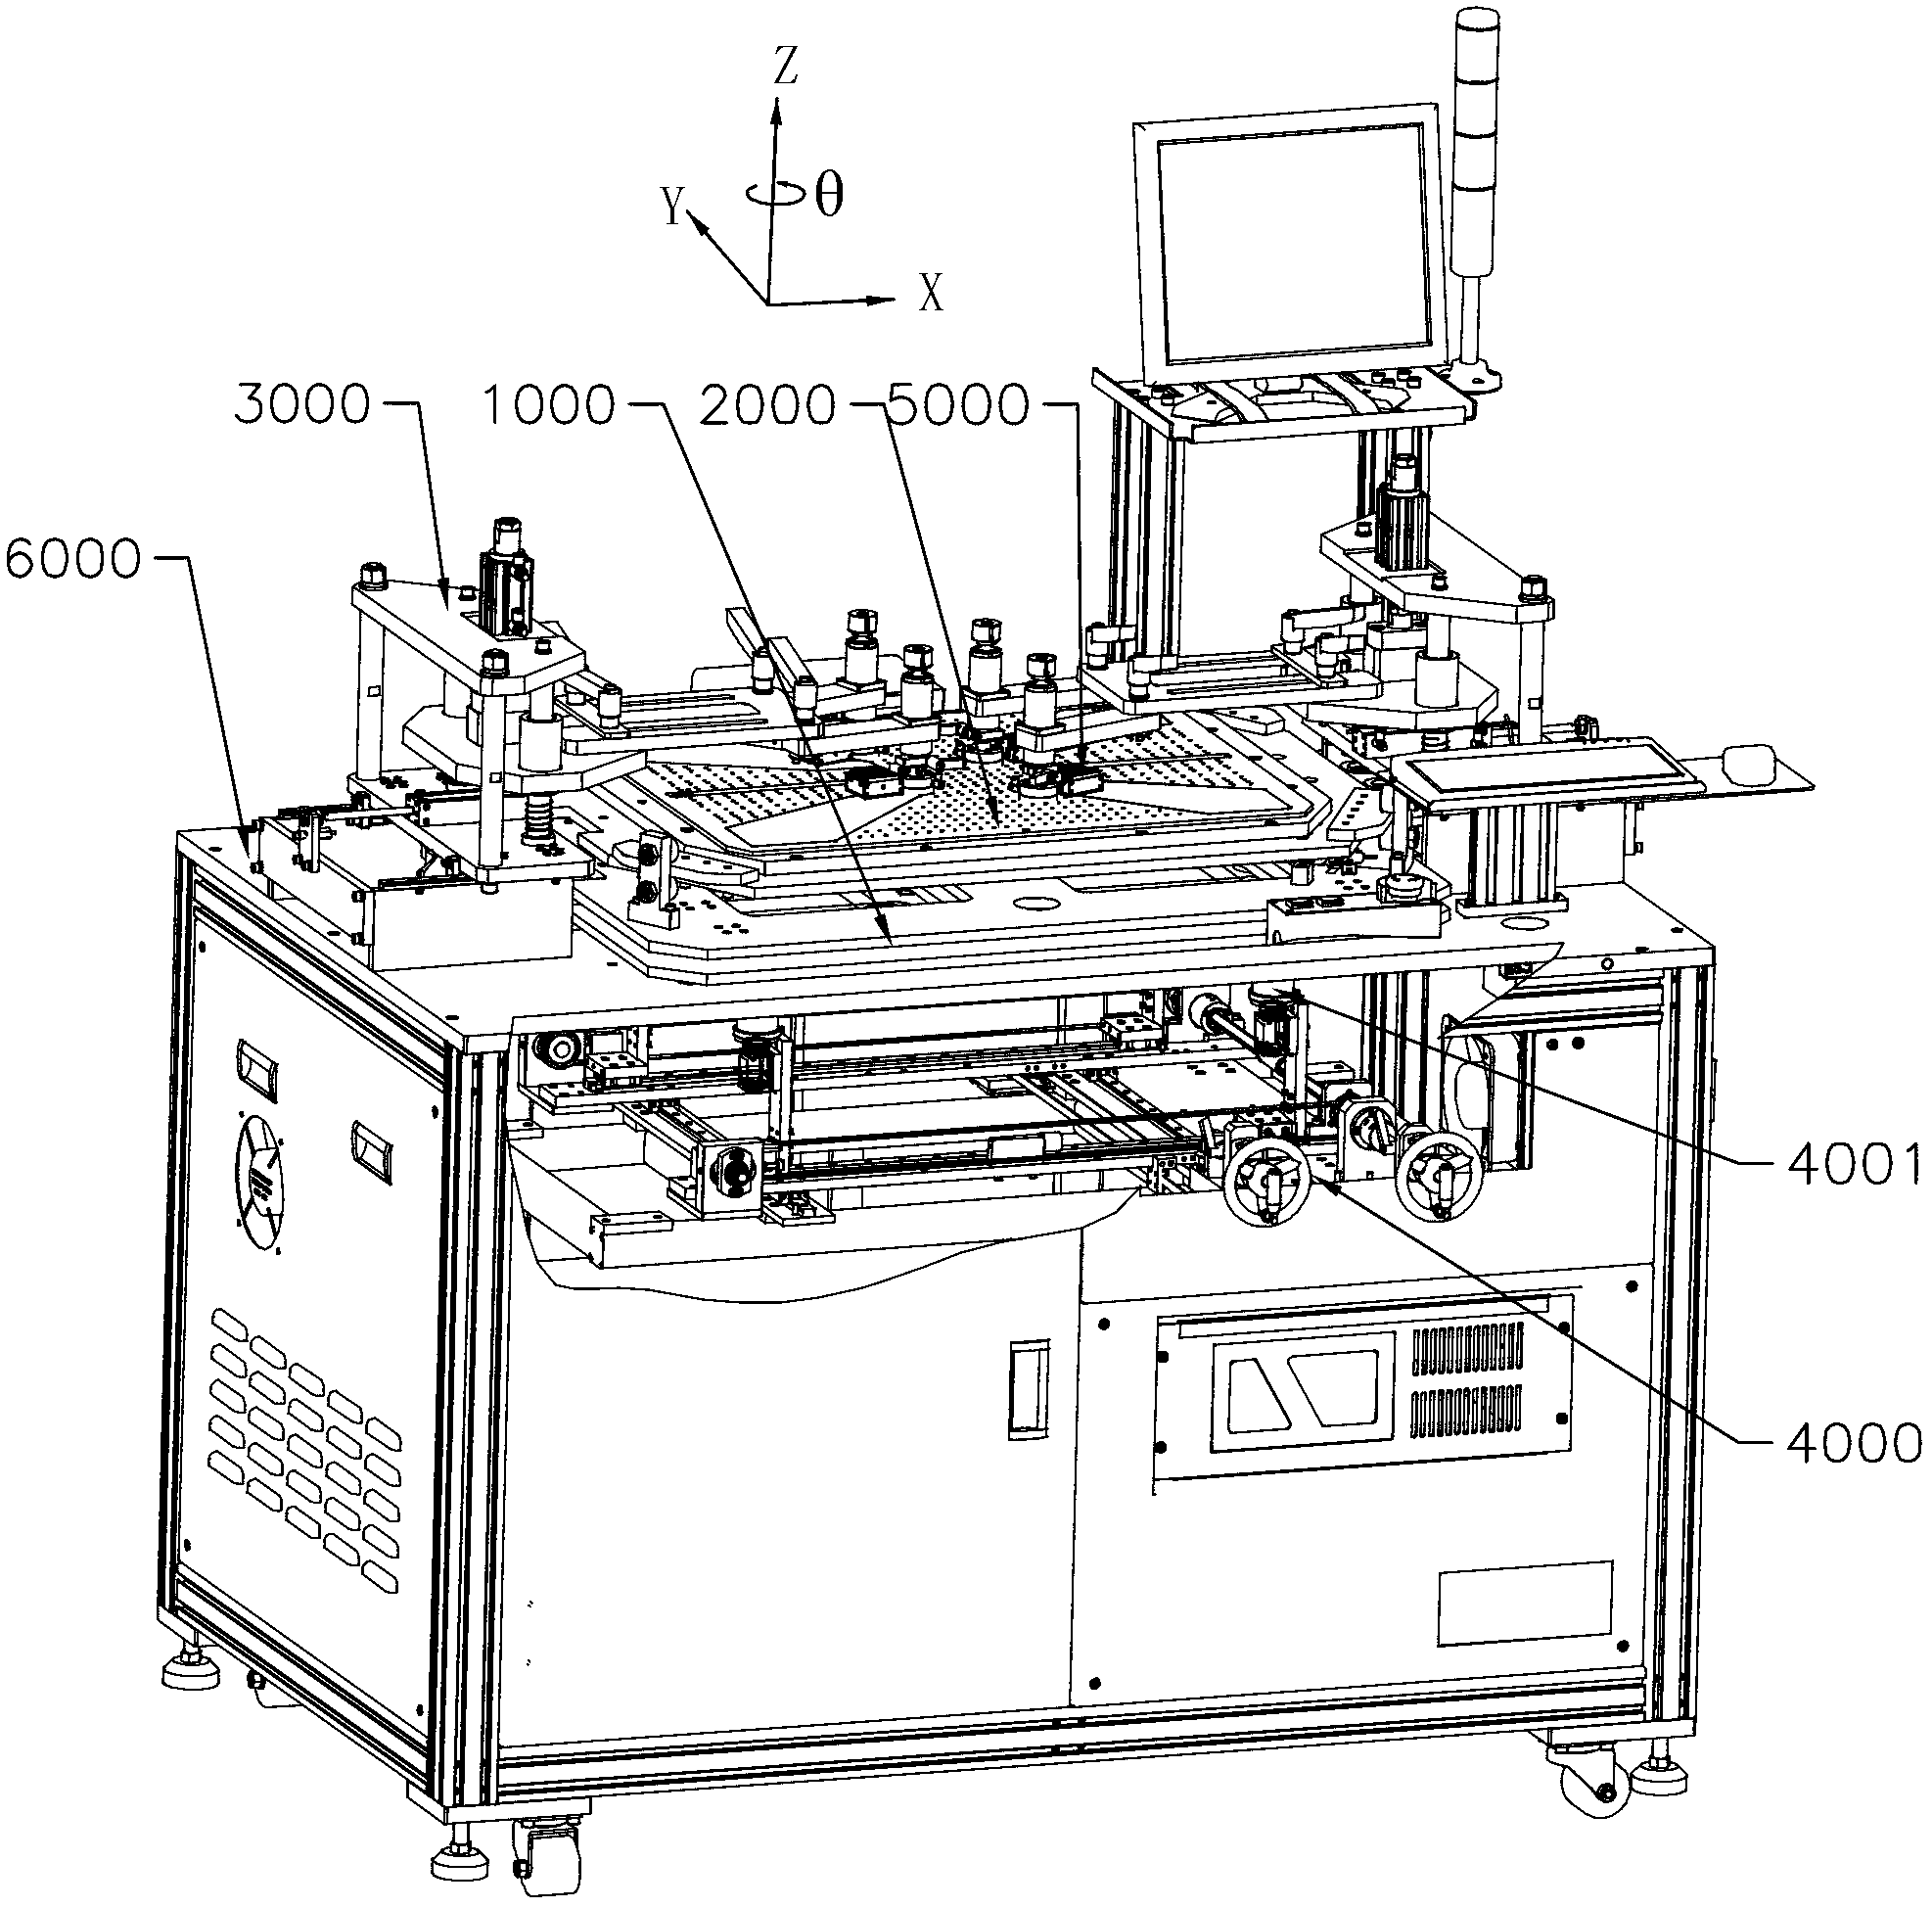 PCB and film alignment device